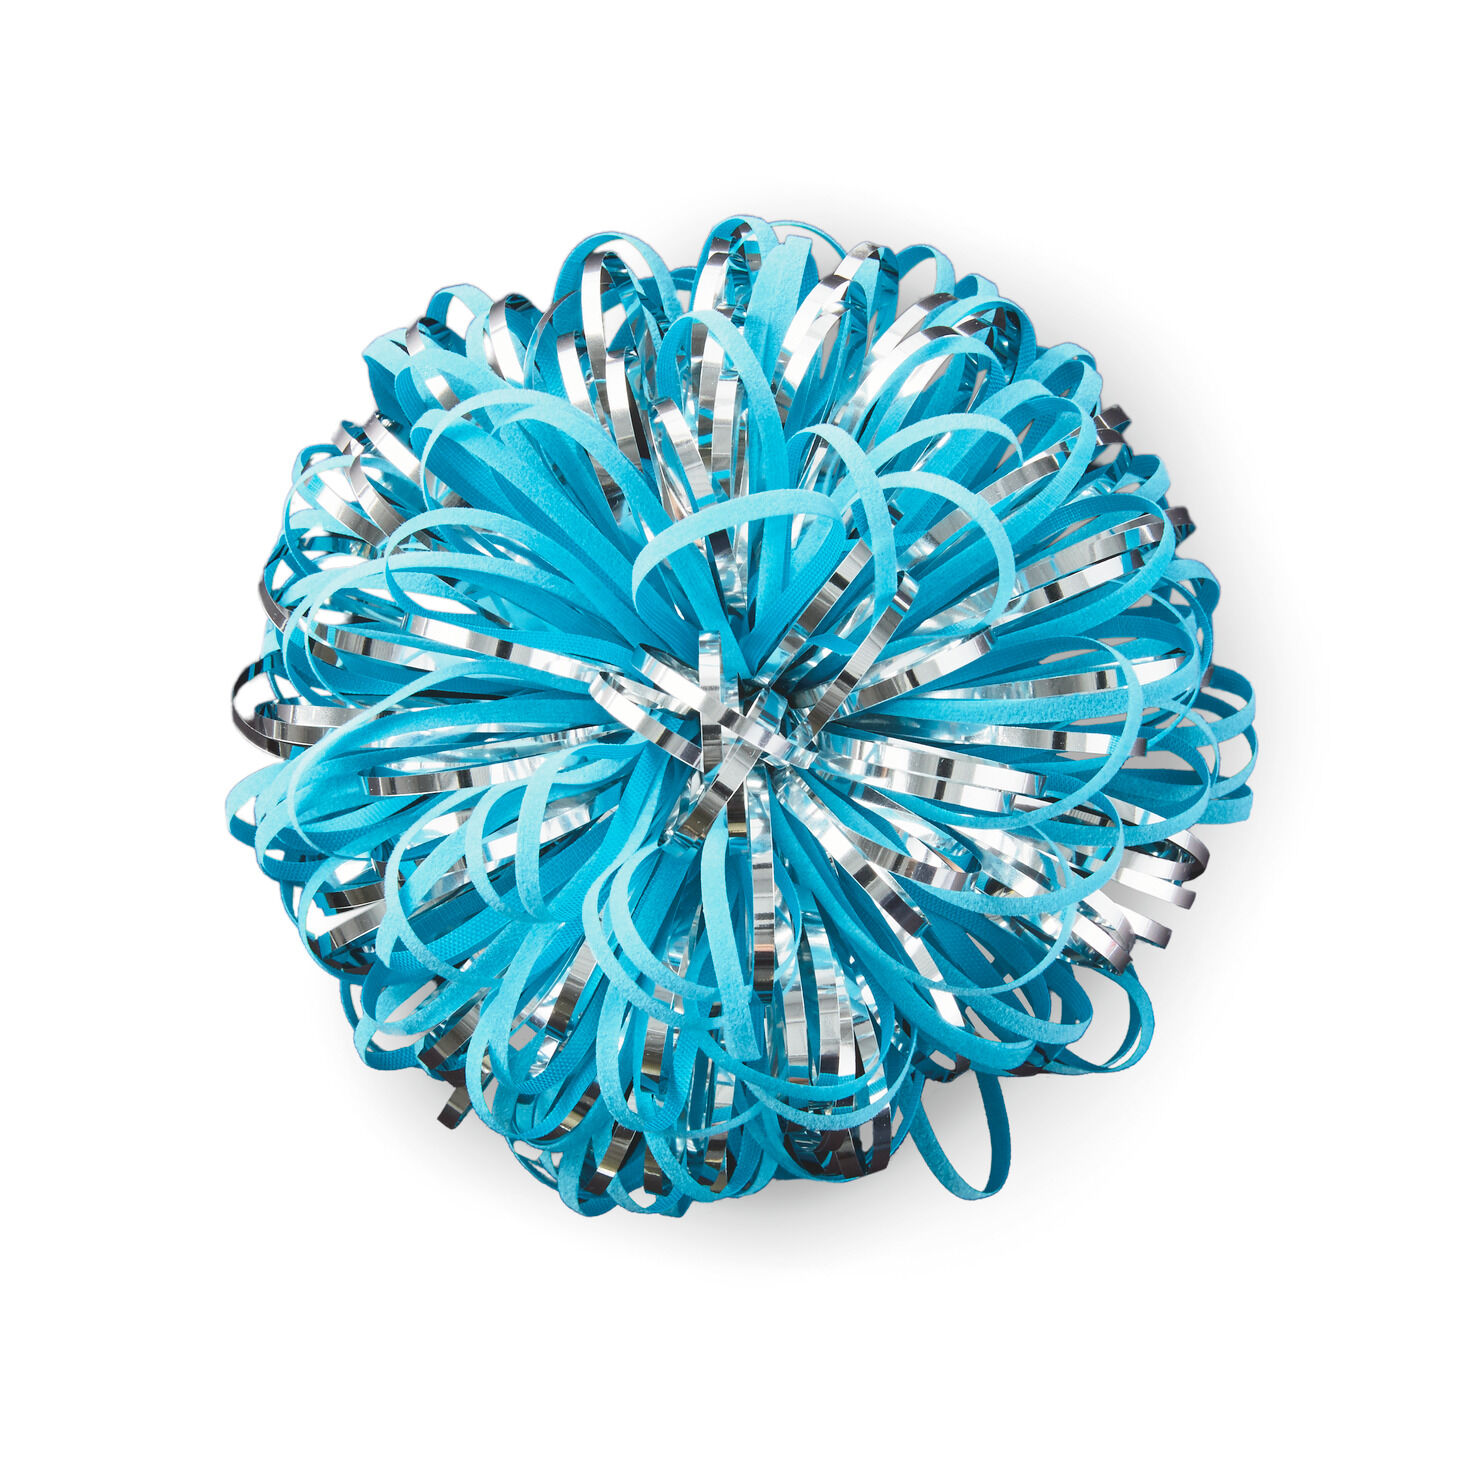 Turquoise and Silver Metallic Pom Pom Gift Bow, 5" for only USD 3.99 | Hallmark